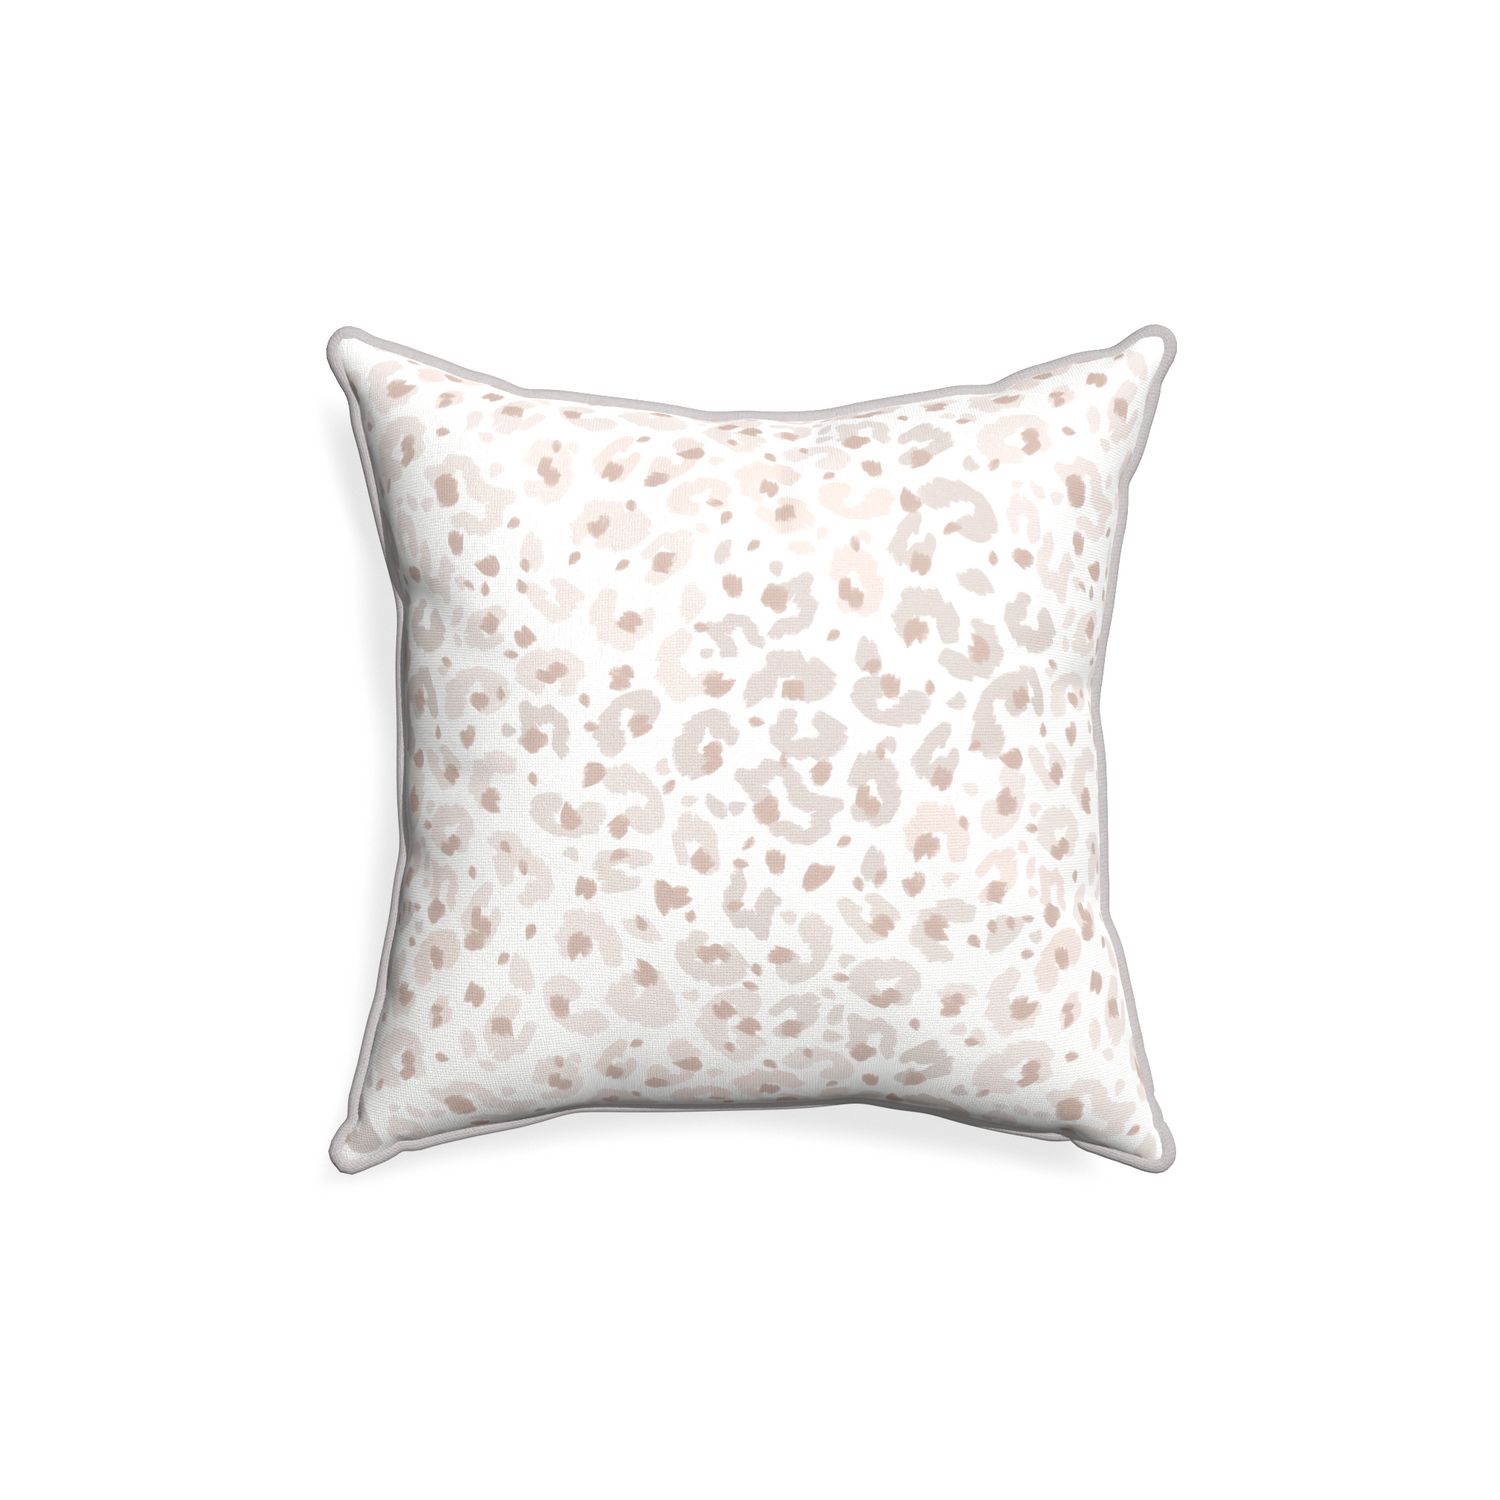 18-square rosie custom beige animal printpillow with pebble piping on white background